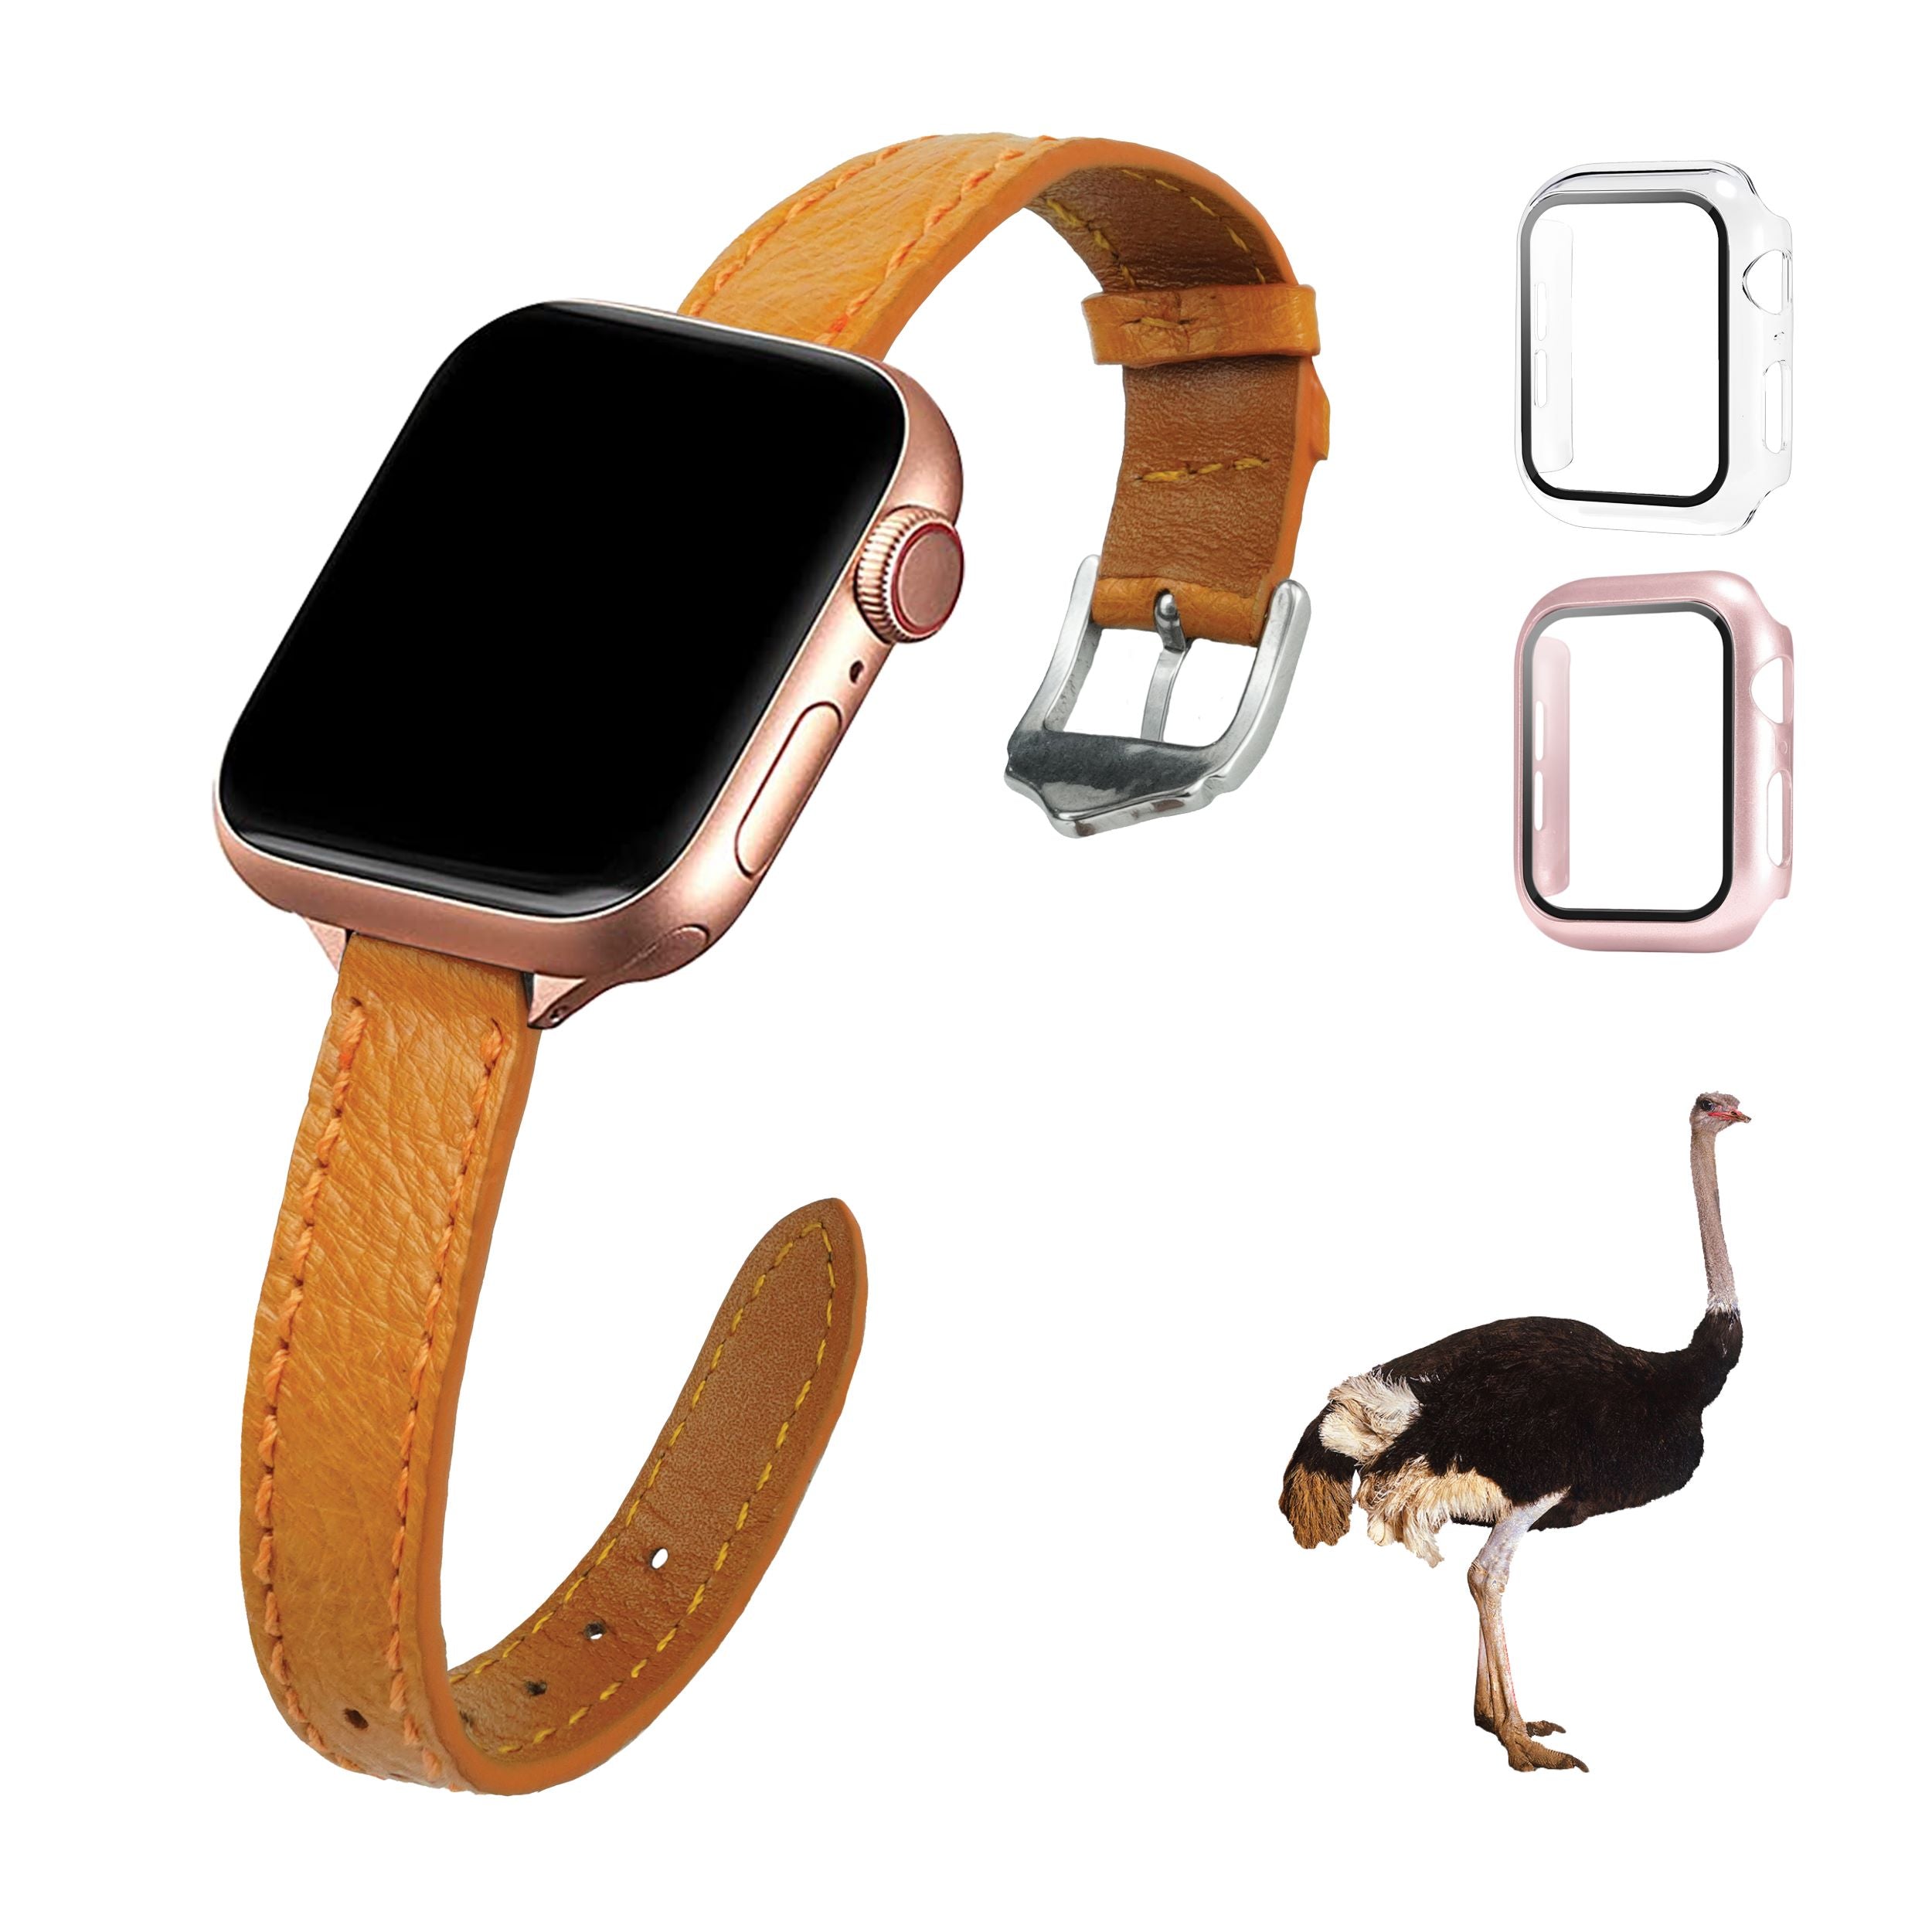 Tan Flat Ostrich Leather Band Compatible Apple Watch Iwatch 44mm Screen Protector Case Silver Adapter Replacement Strap For Smartwatch Series 4 5 6 SE Leather Handmade AW-182S-W-44MM